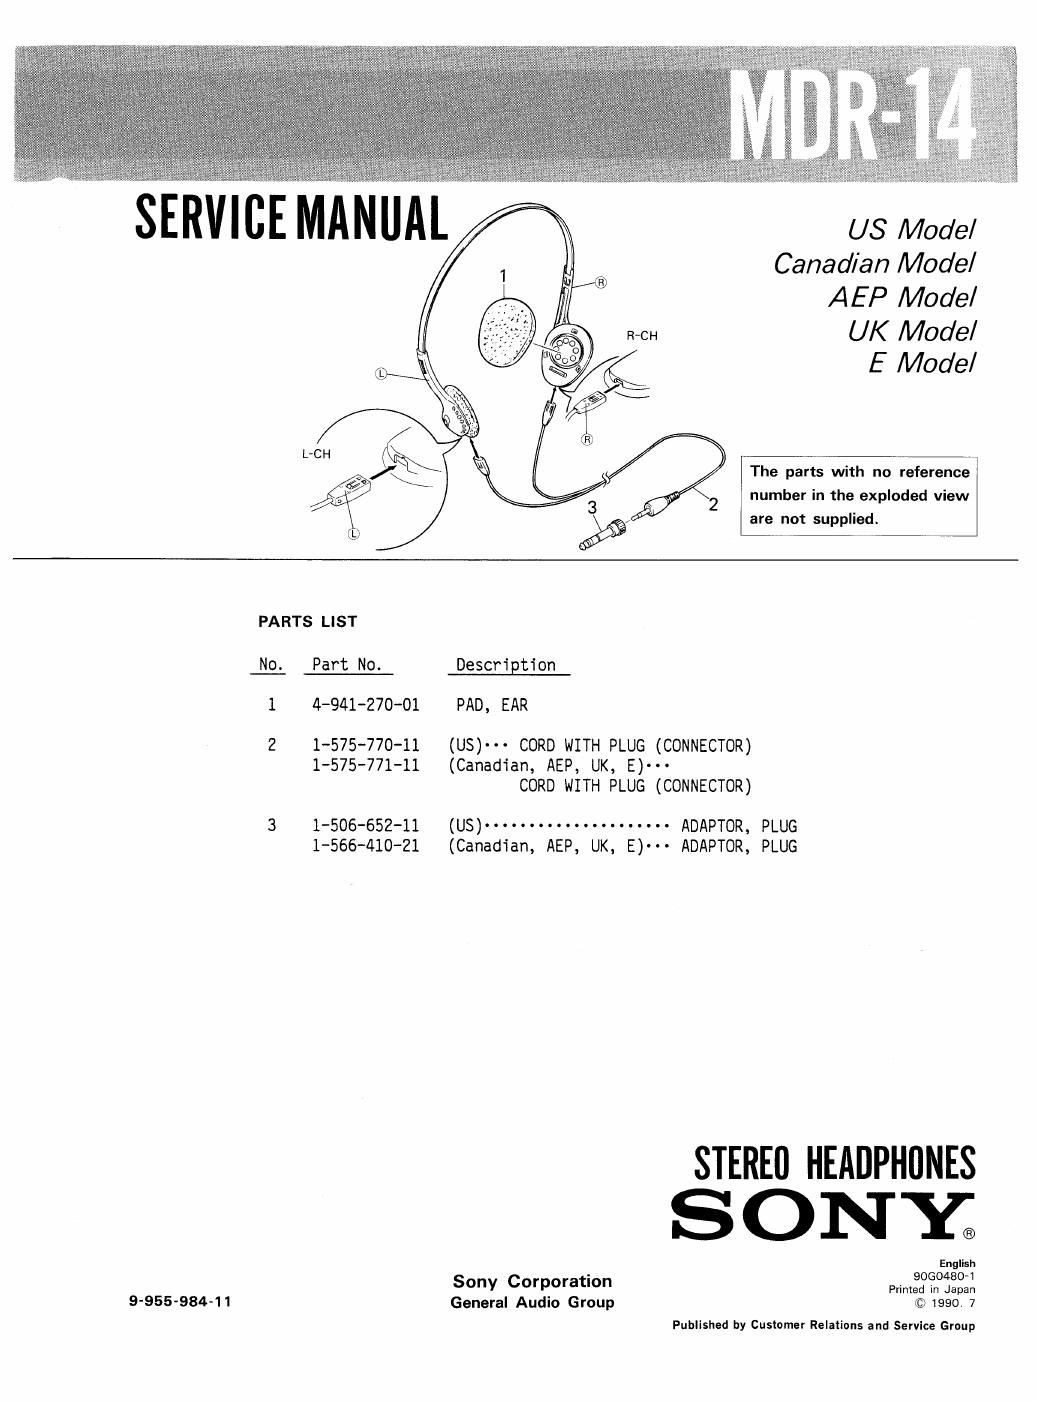 sony mdr 14 service manual